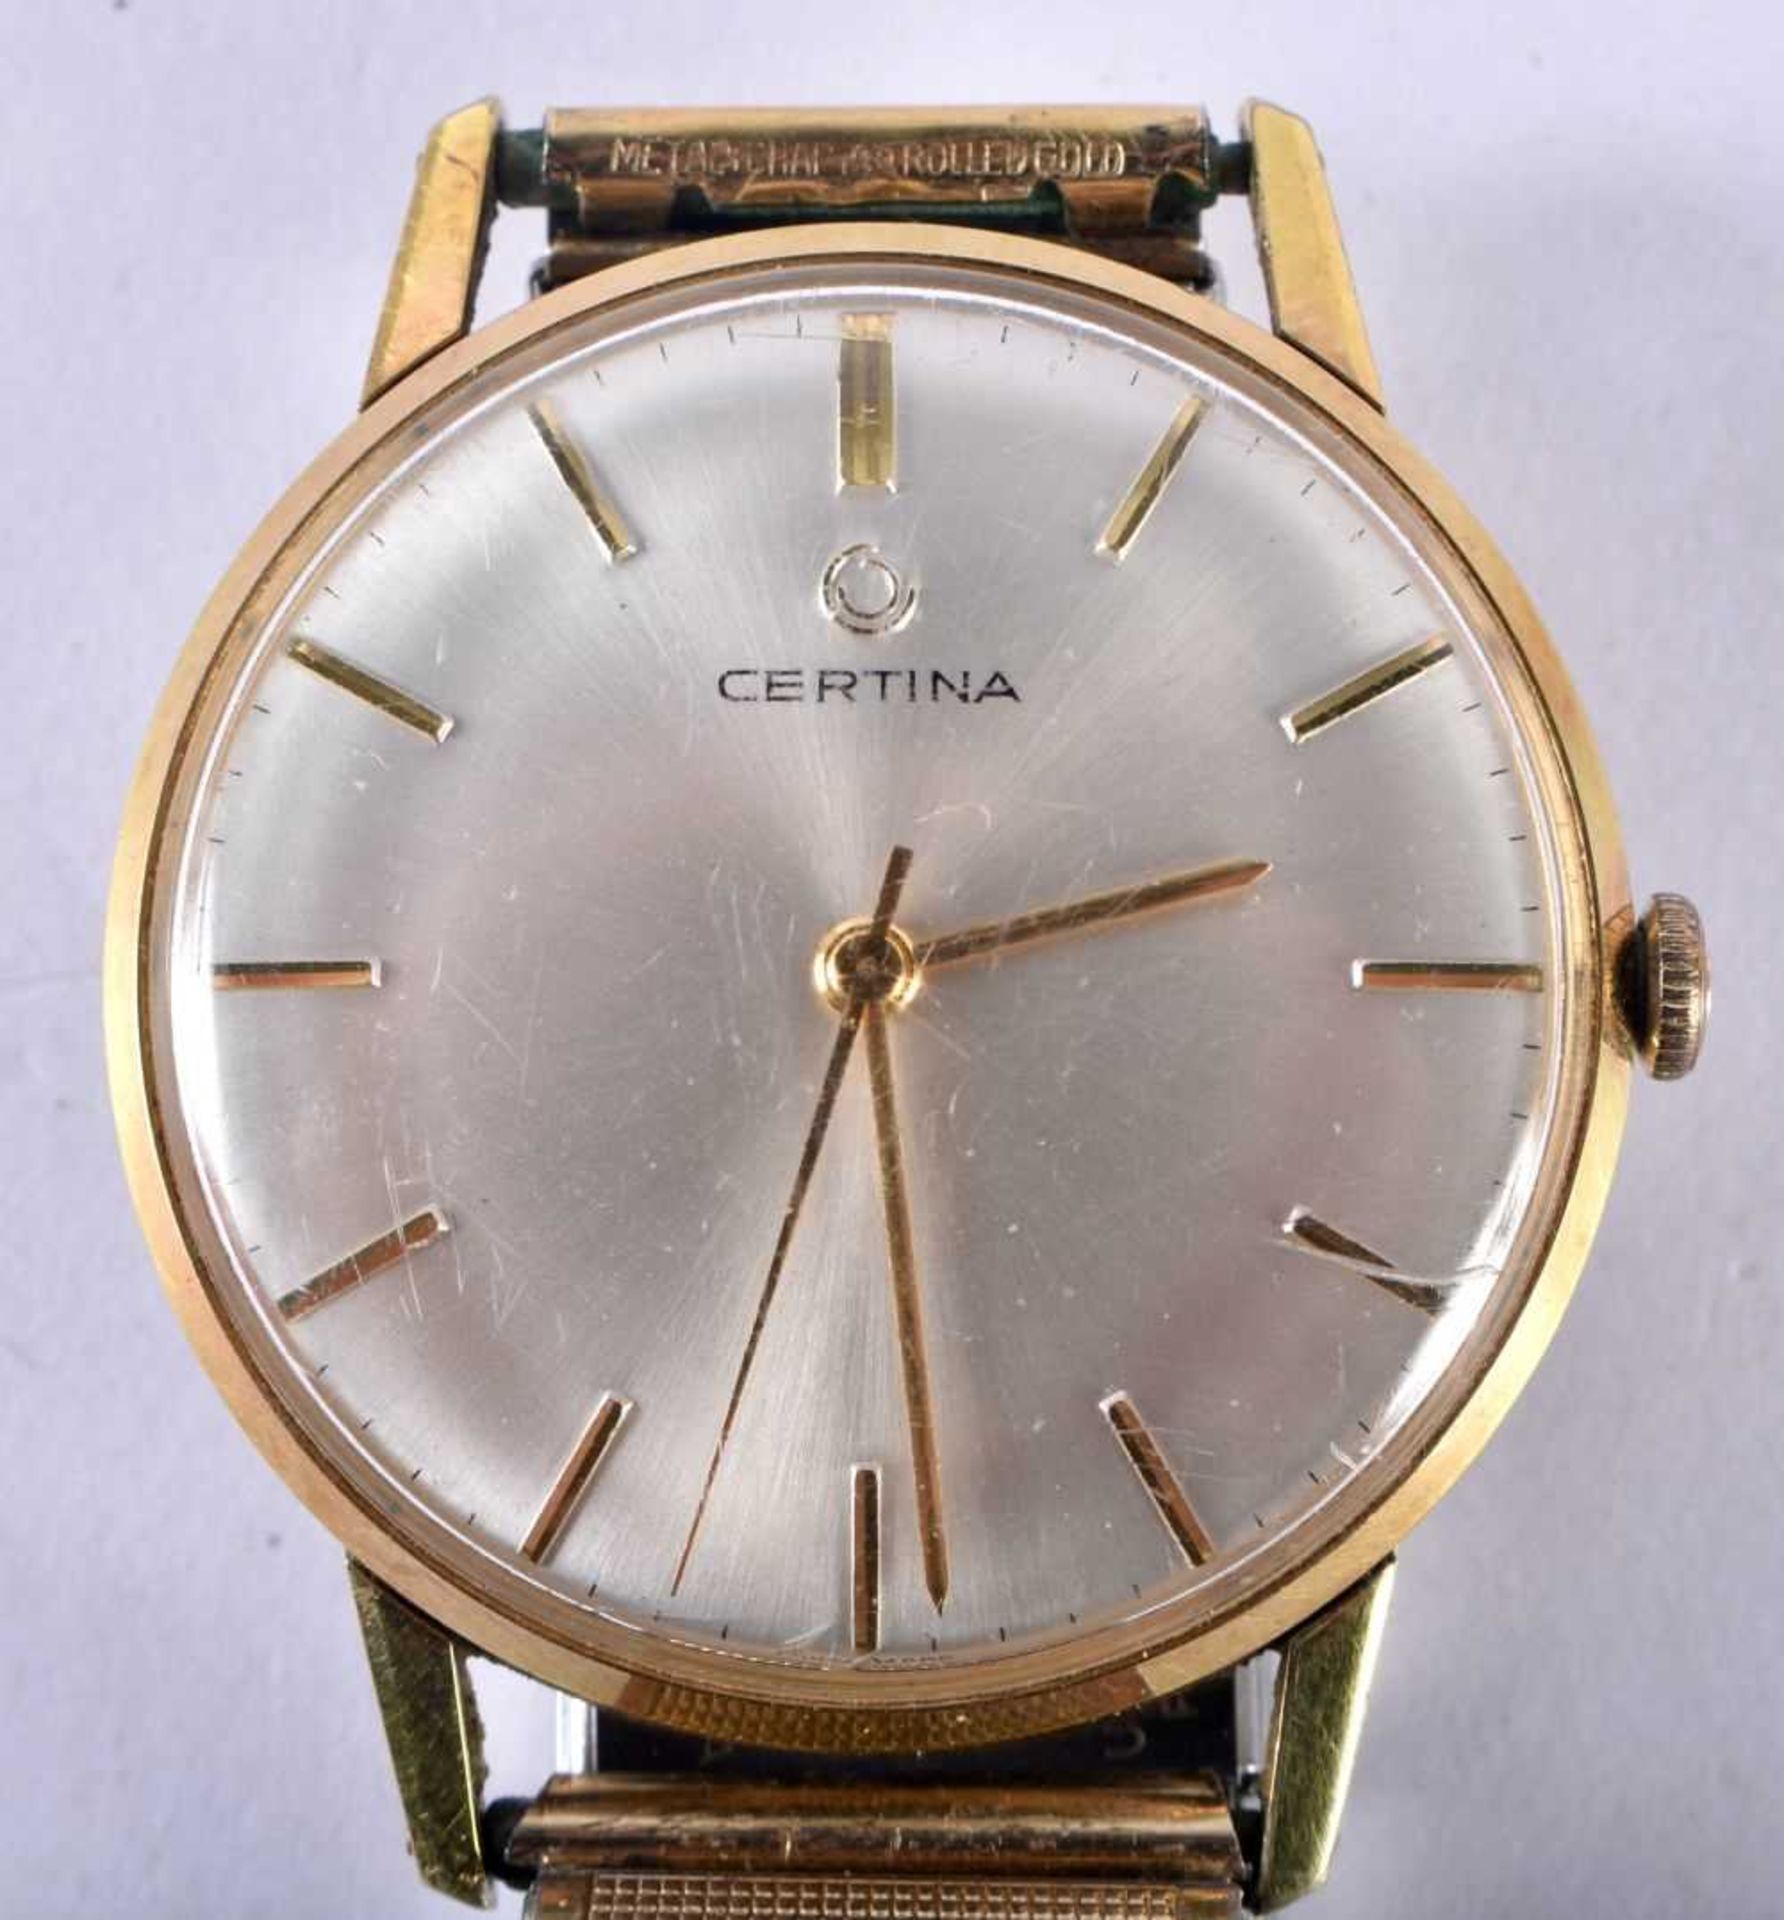 CERTINA Gents Vintage Gold Tone WRIST WATCH. Movement - Hand-wind Movement. WORKING - Tested For